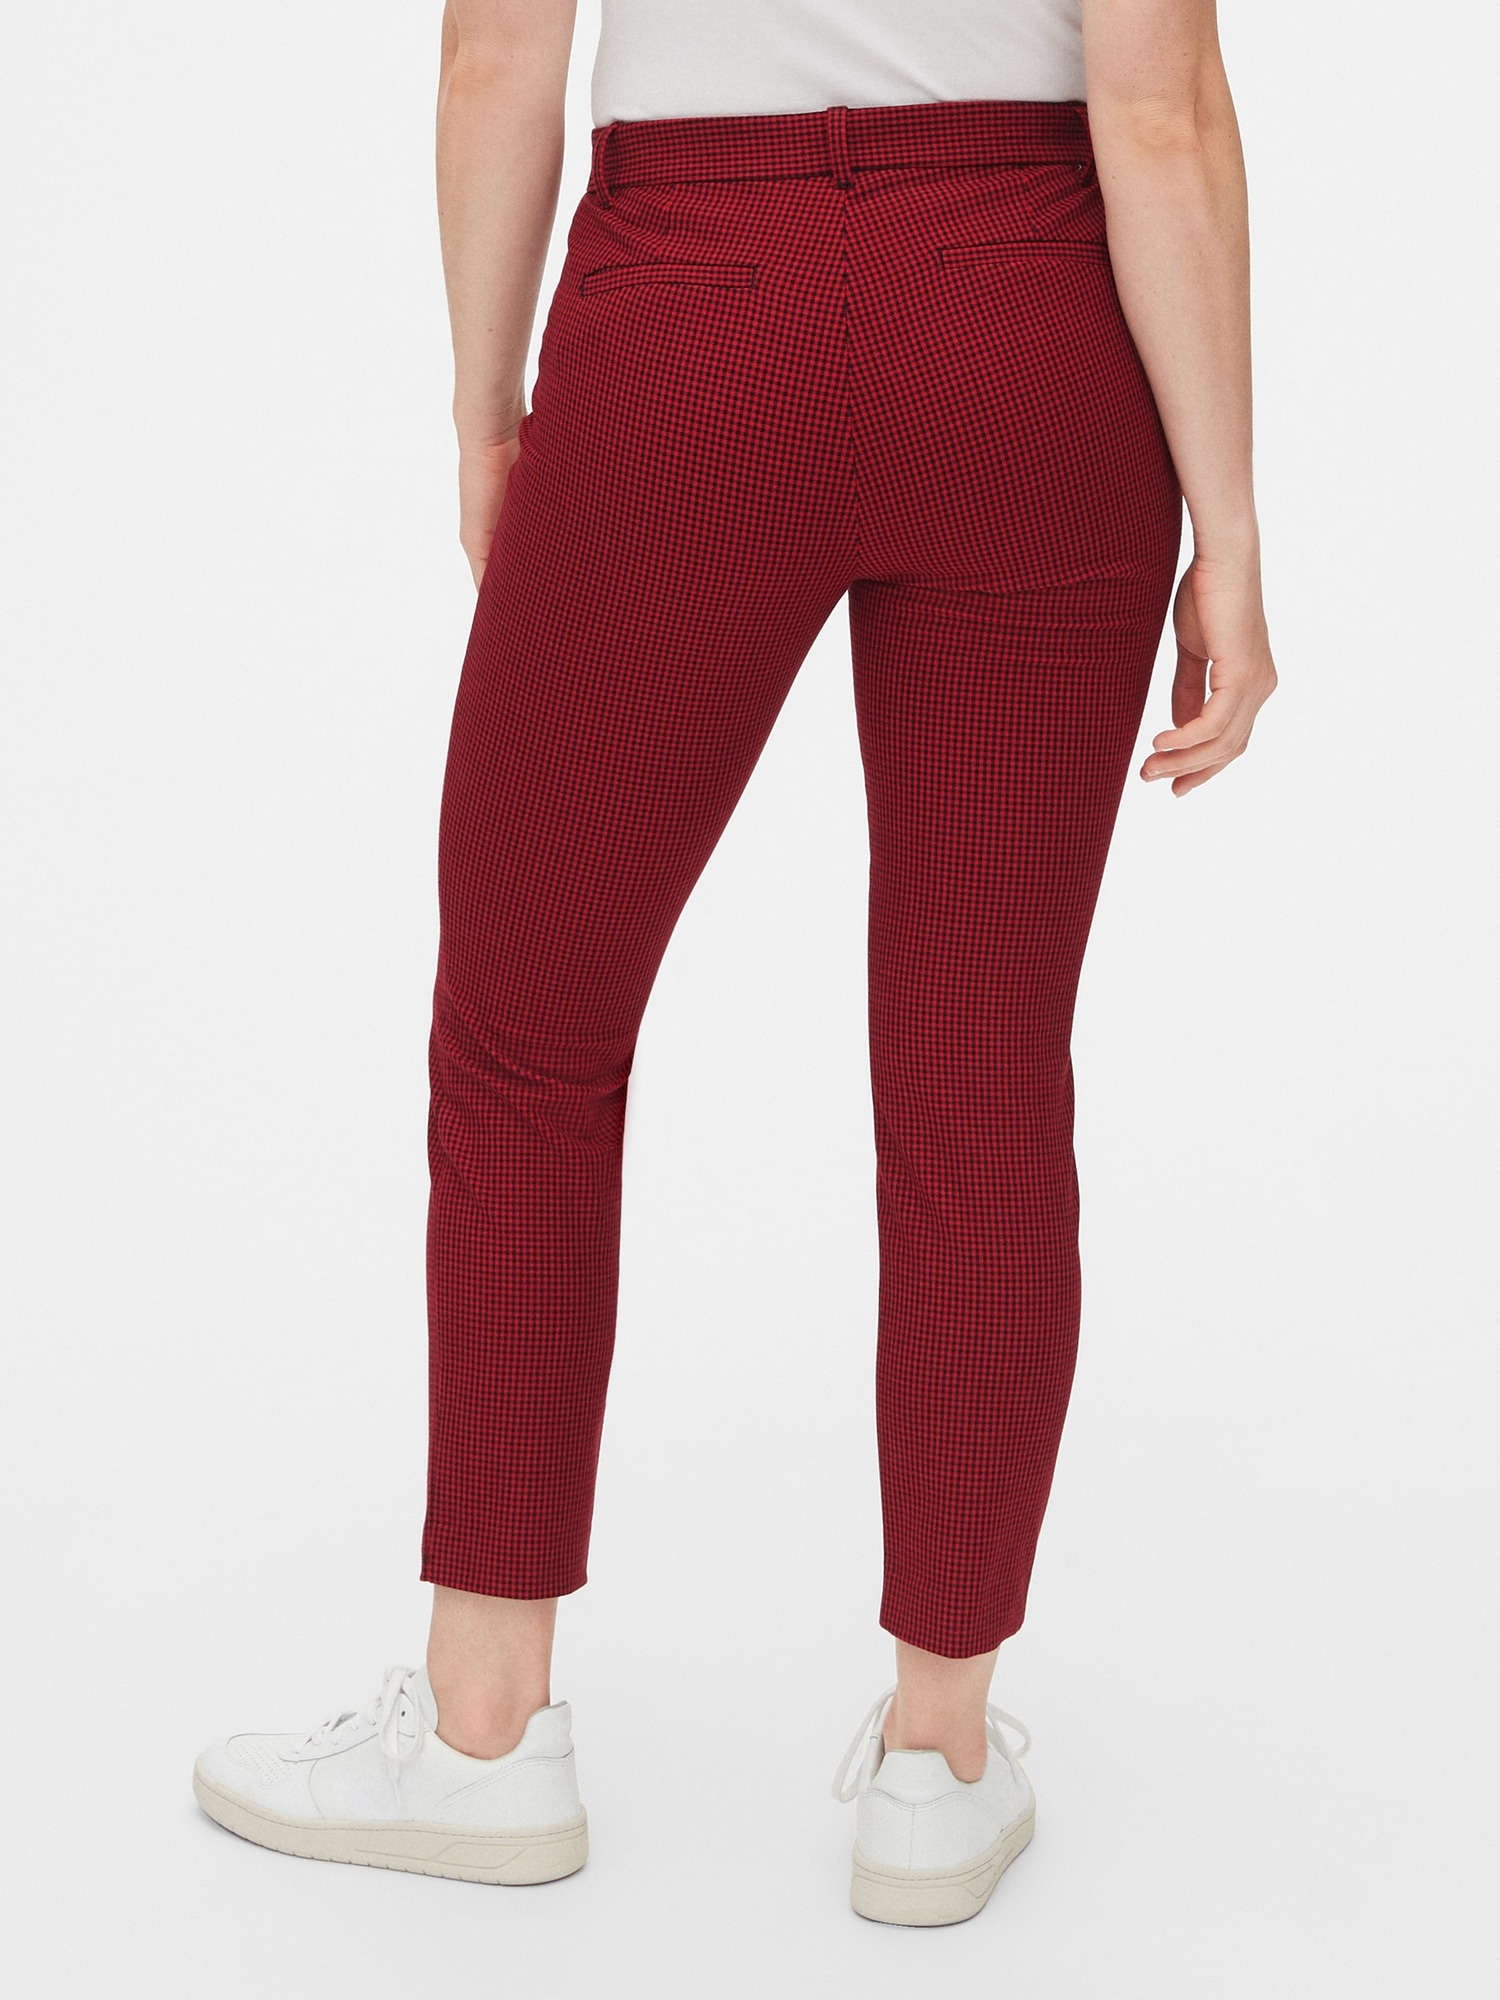 The Tall Eva Ankle Pant - Curvy Fit